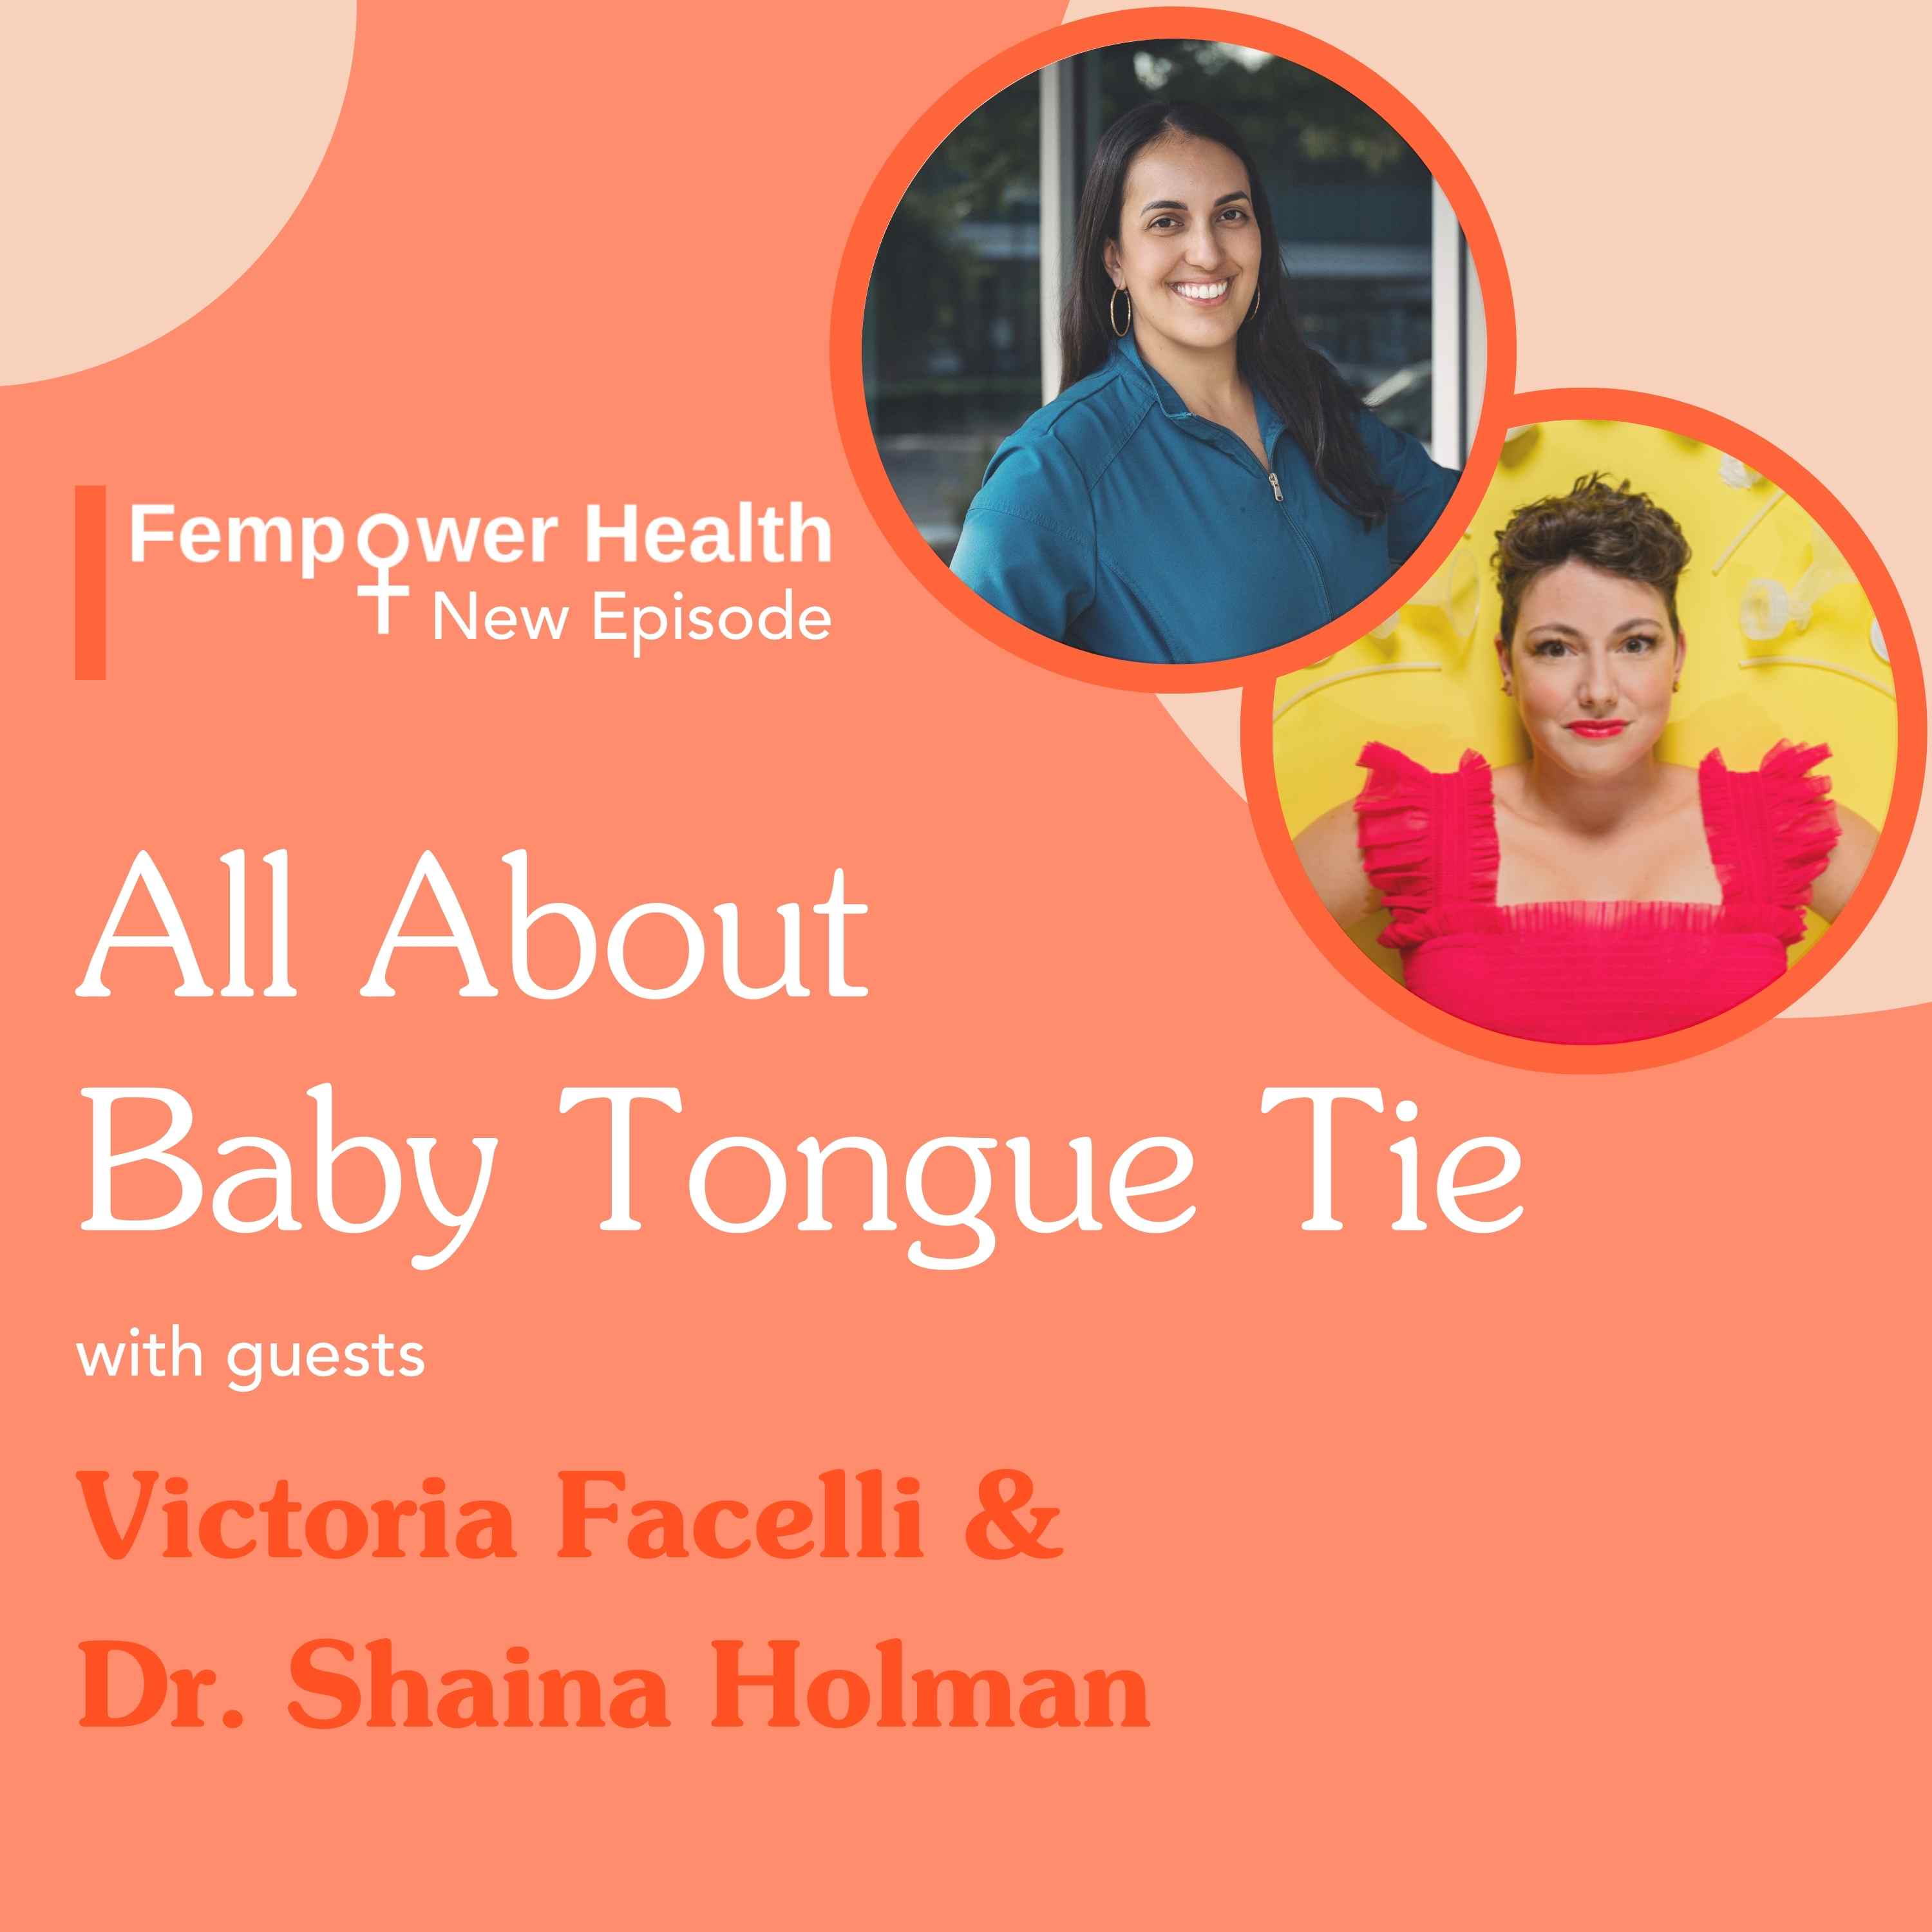 All About Baby Tongue Tie | Dr. Shaina Holman & Victoria Facelli